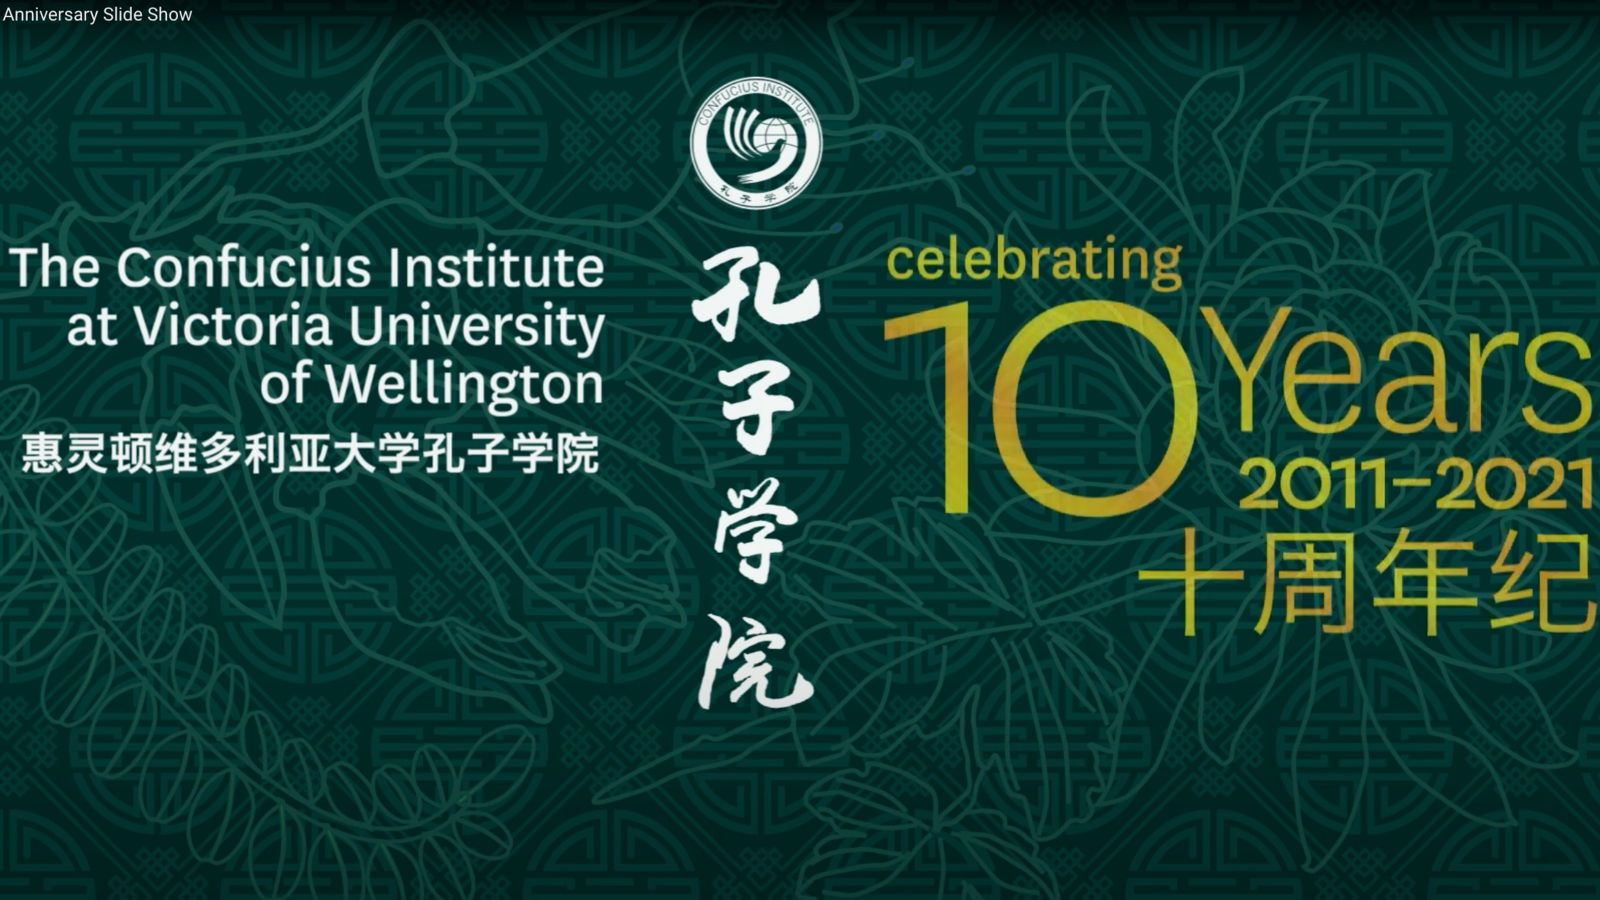 A screenshot of a slide show with words that say, The Confucius Institute at Victoria University of Wellington